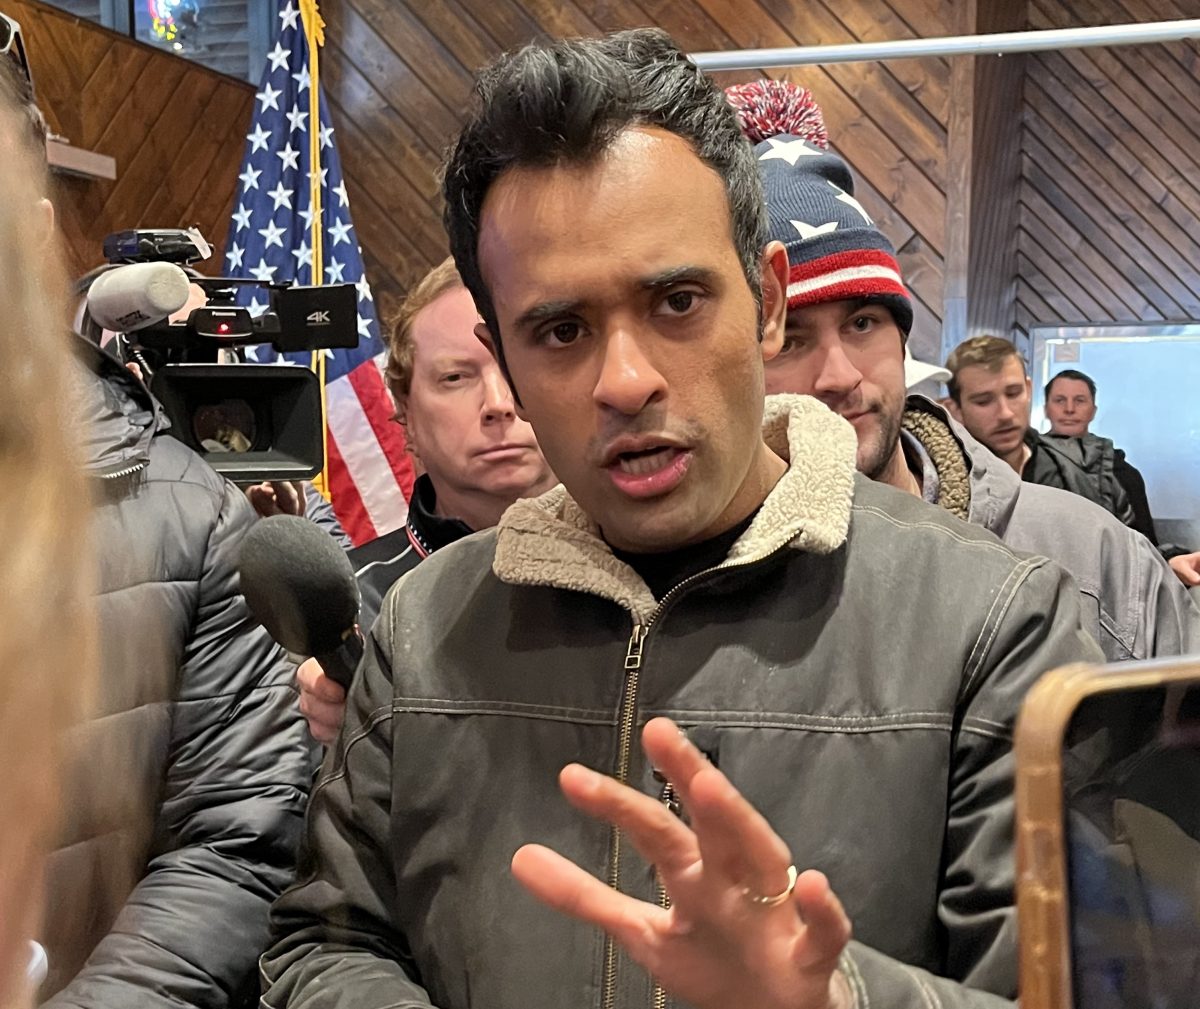 Republican+candidate+Vivek+Ramaswamy+answers+questions+from+reporters+following+a+rally+in+Ames%2C+Iowa+Jan.+14.+He+announced+he+would+drop+his+presidential+bid+and+endorse+former+President+Donald+Trump+after+placing+fourth+at+the+Iowa+caucus+Jan.+15.